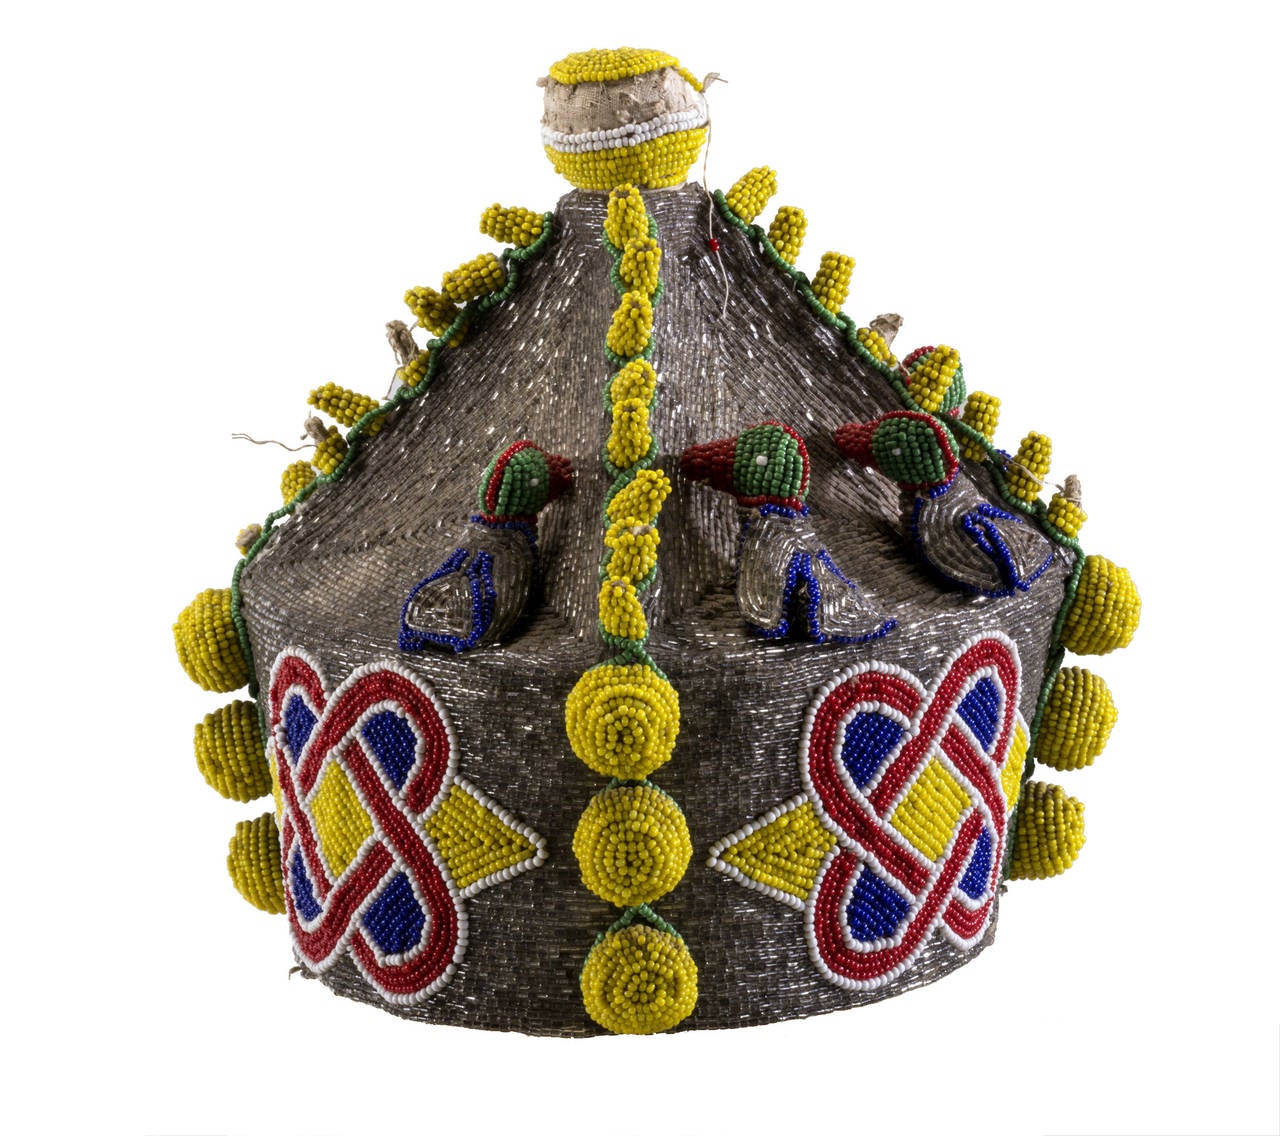 Beautiful beaded hat from Yoruba Tribe Nigeria with bright yellow, red, blue and green colors. Its nice an vibrant worn by Yoruba priest from Nigeria.
It has infinity symbol which means everlasting. It does have healing quality to it. Missing only